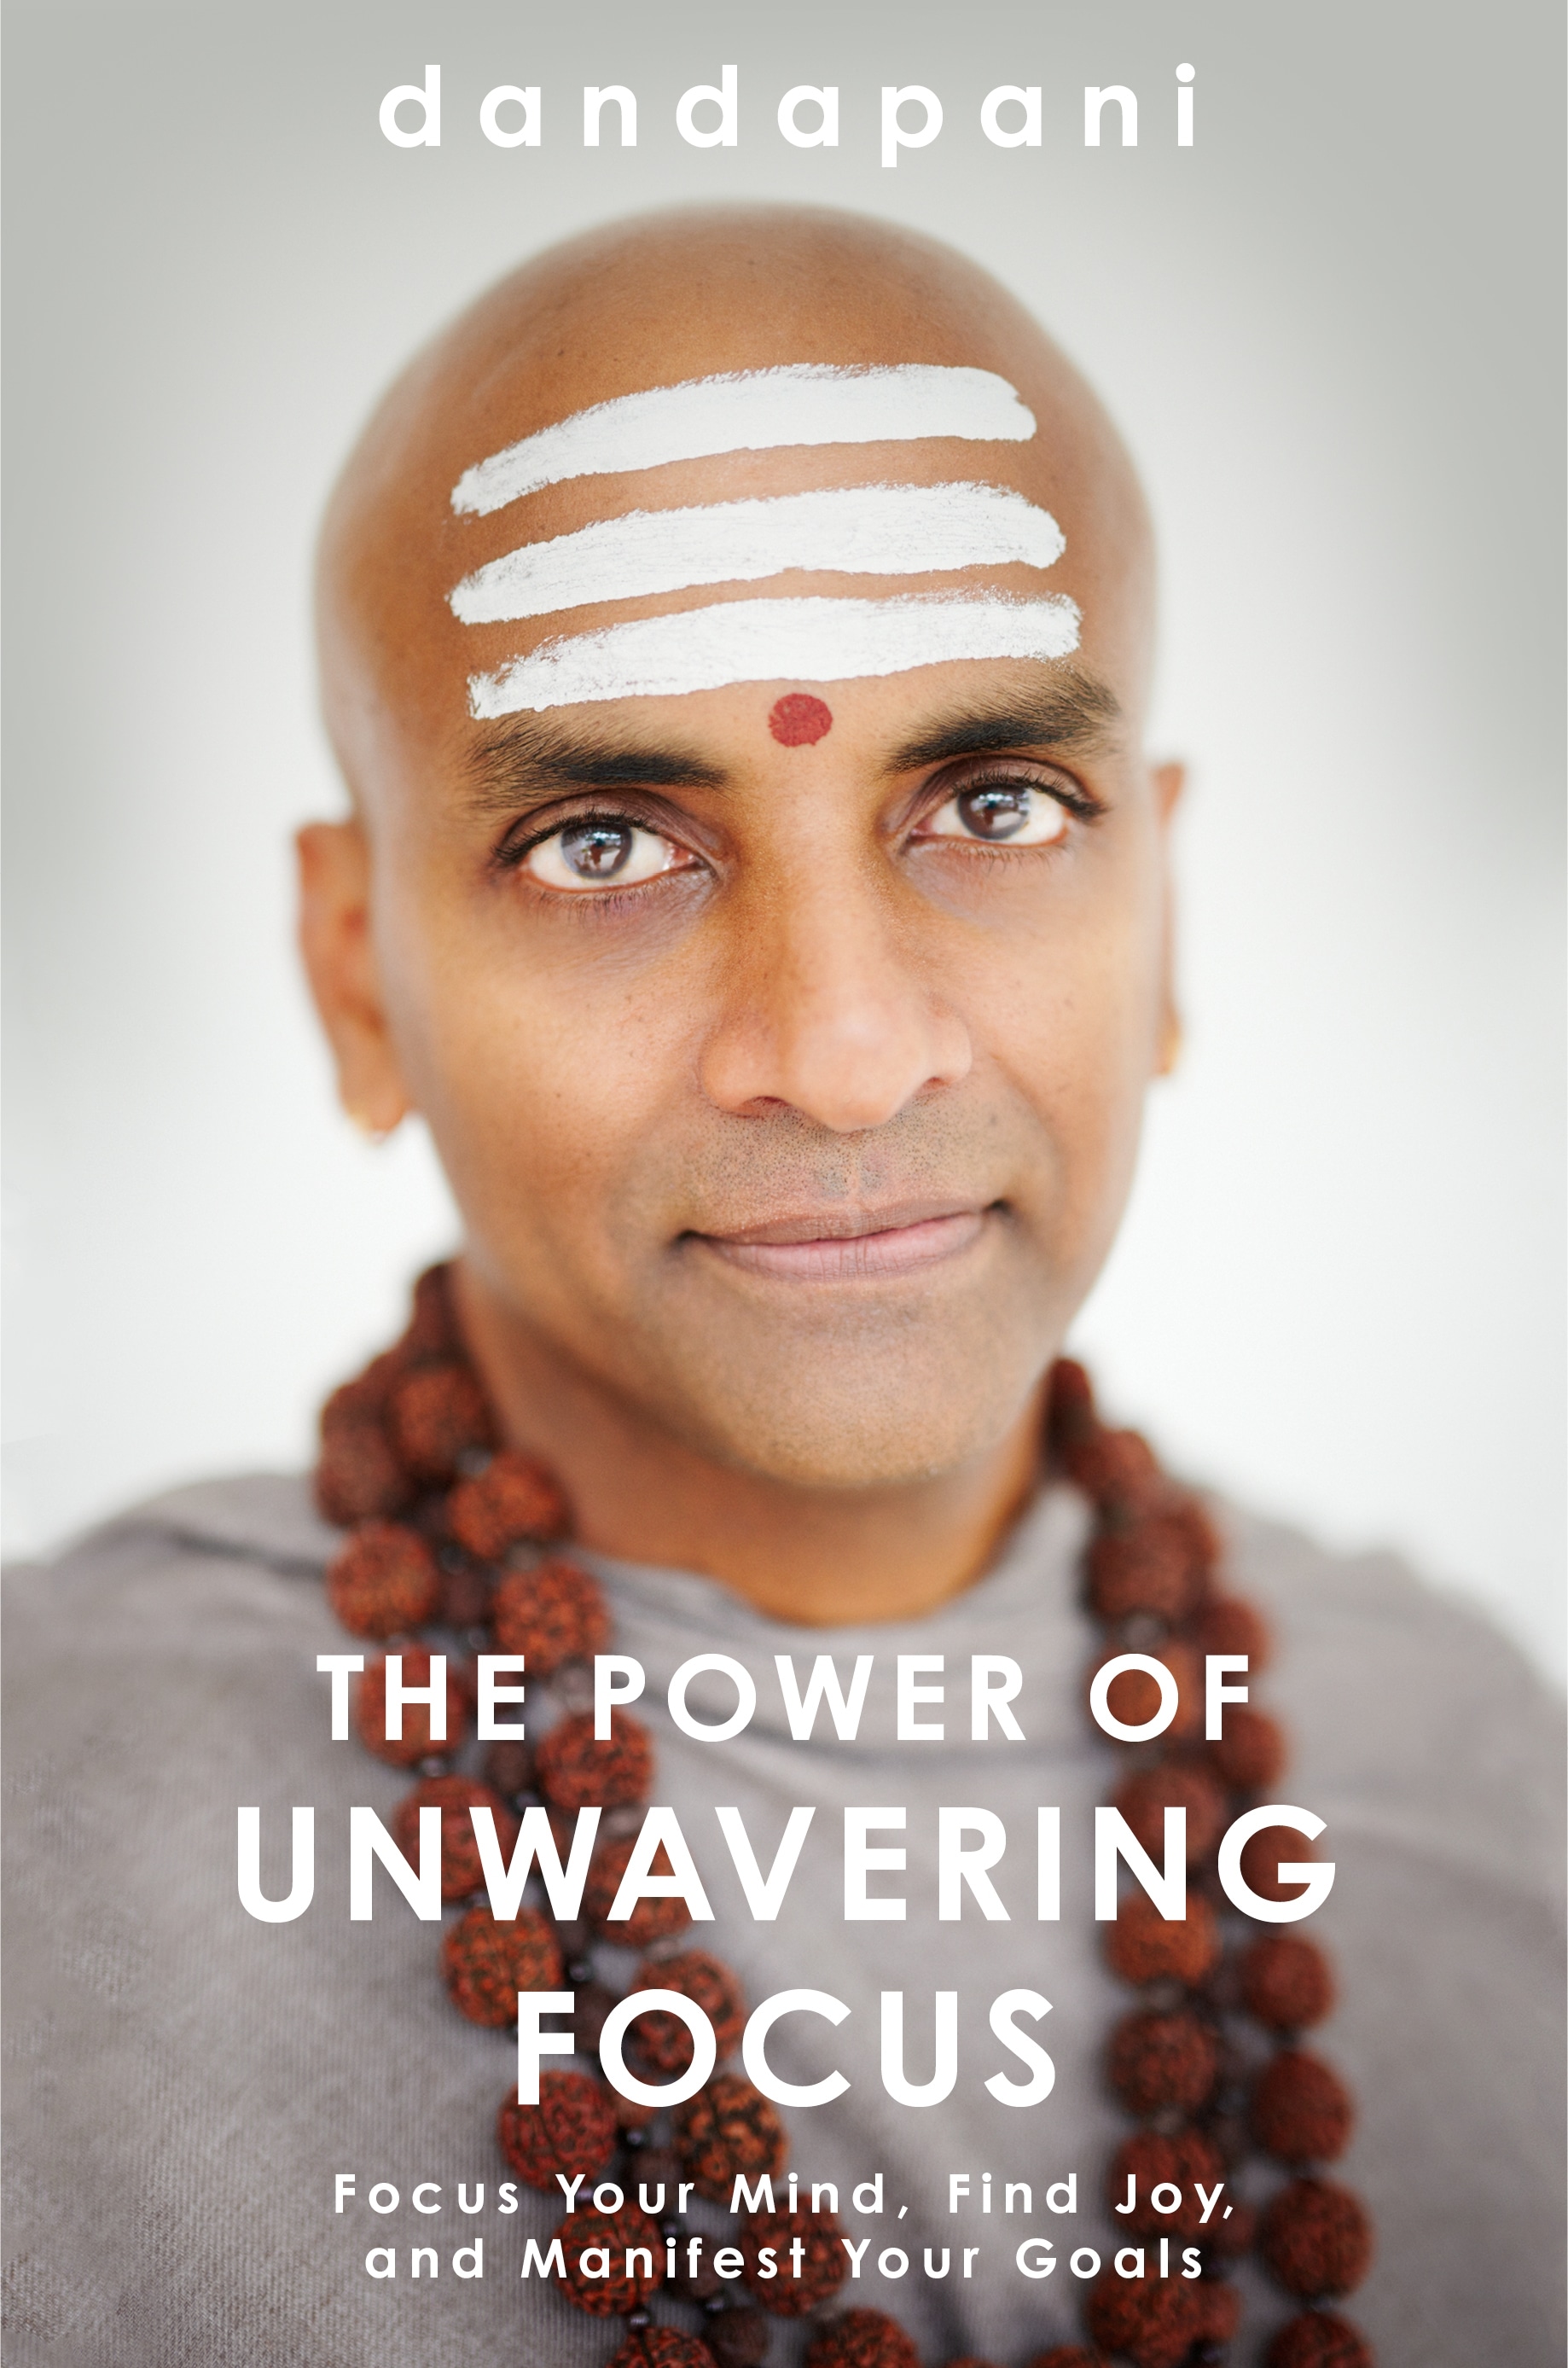 Book “The Power of Unwavering Focus” by Dandapani — January 12, 2023